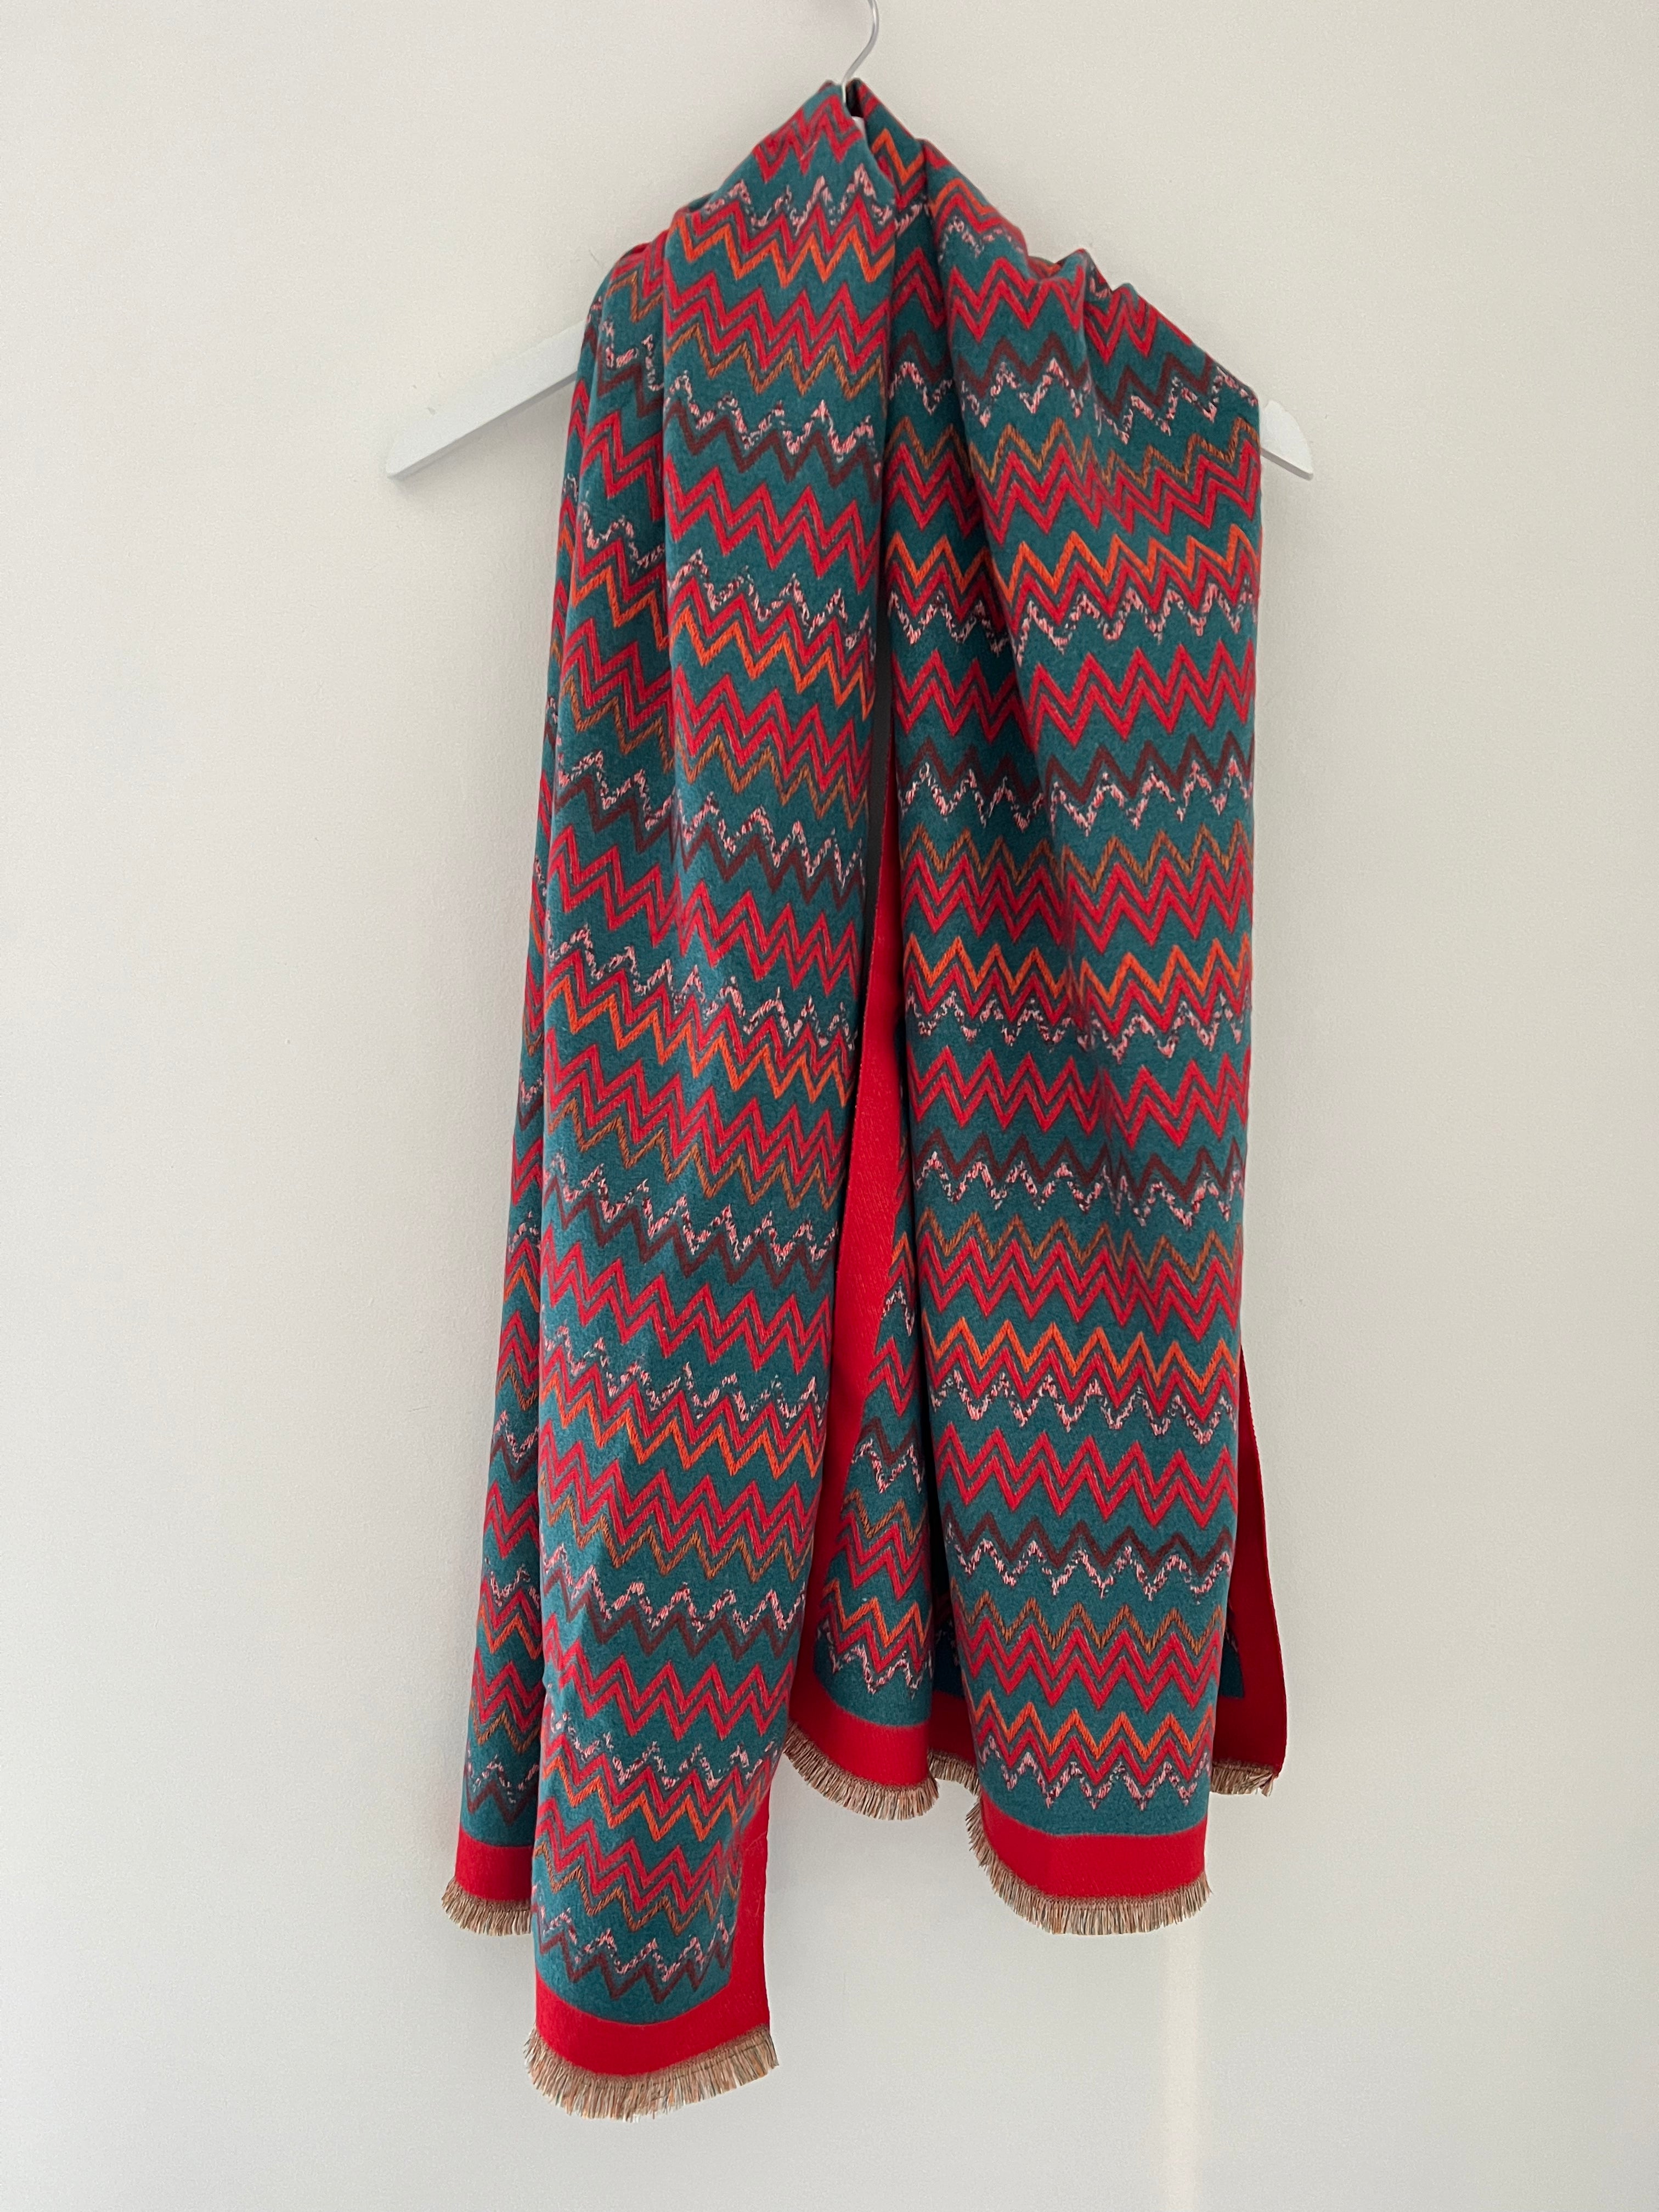 Teal & Red Zig Zag Knitted Scarf